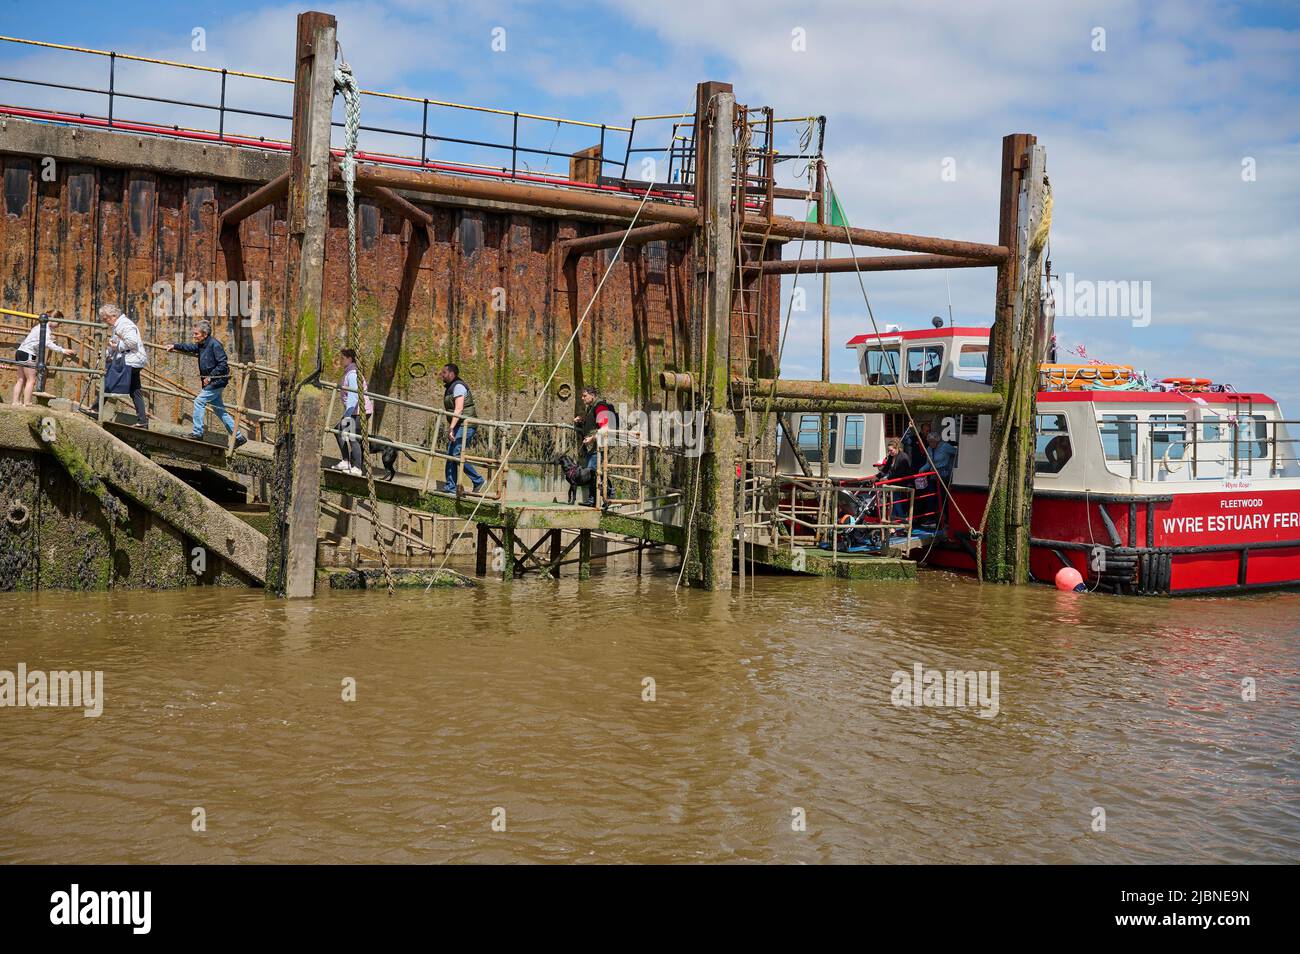 Passengers disembarking from the Wyre estuary ferry at Fleetwood from Knott End Stock Photo